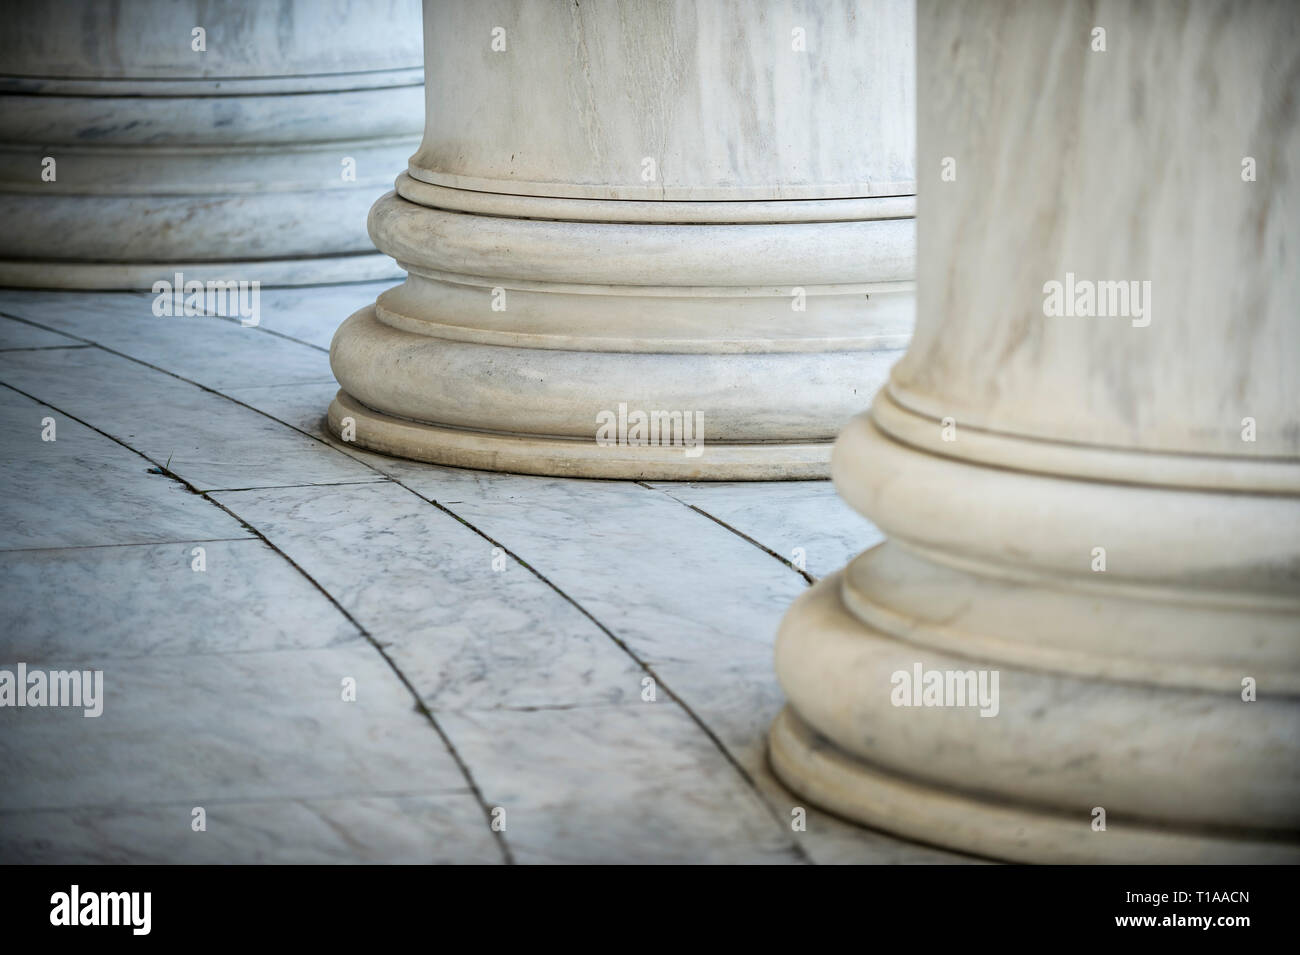 White marble neoclassical columns of the rotunda of the Jefferson Memorial building in Washington DC, USA Stock Photo